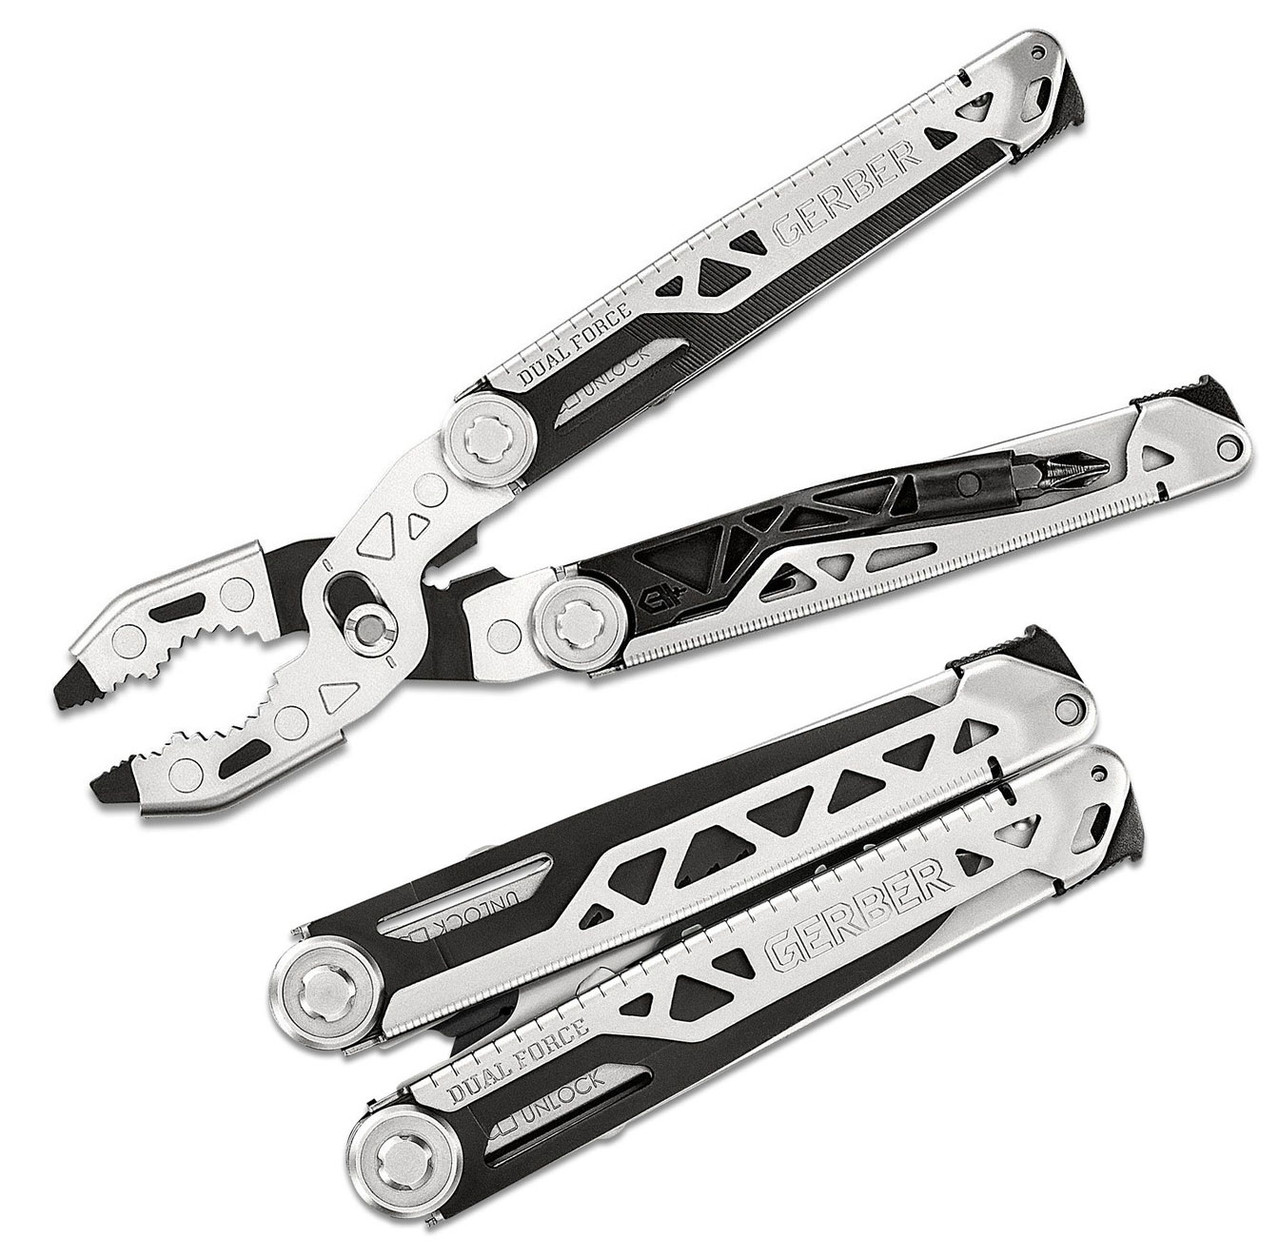 Gerber Dual-Force Multi-Tool 4.65 Closed, Silver and Black Steel Handles,  Fabric Sheath - KnifeCenter - 30-001721